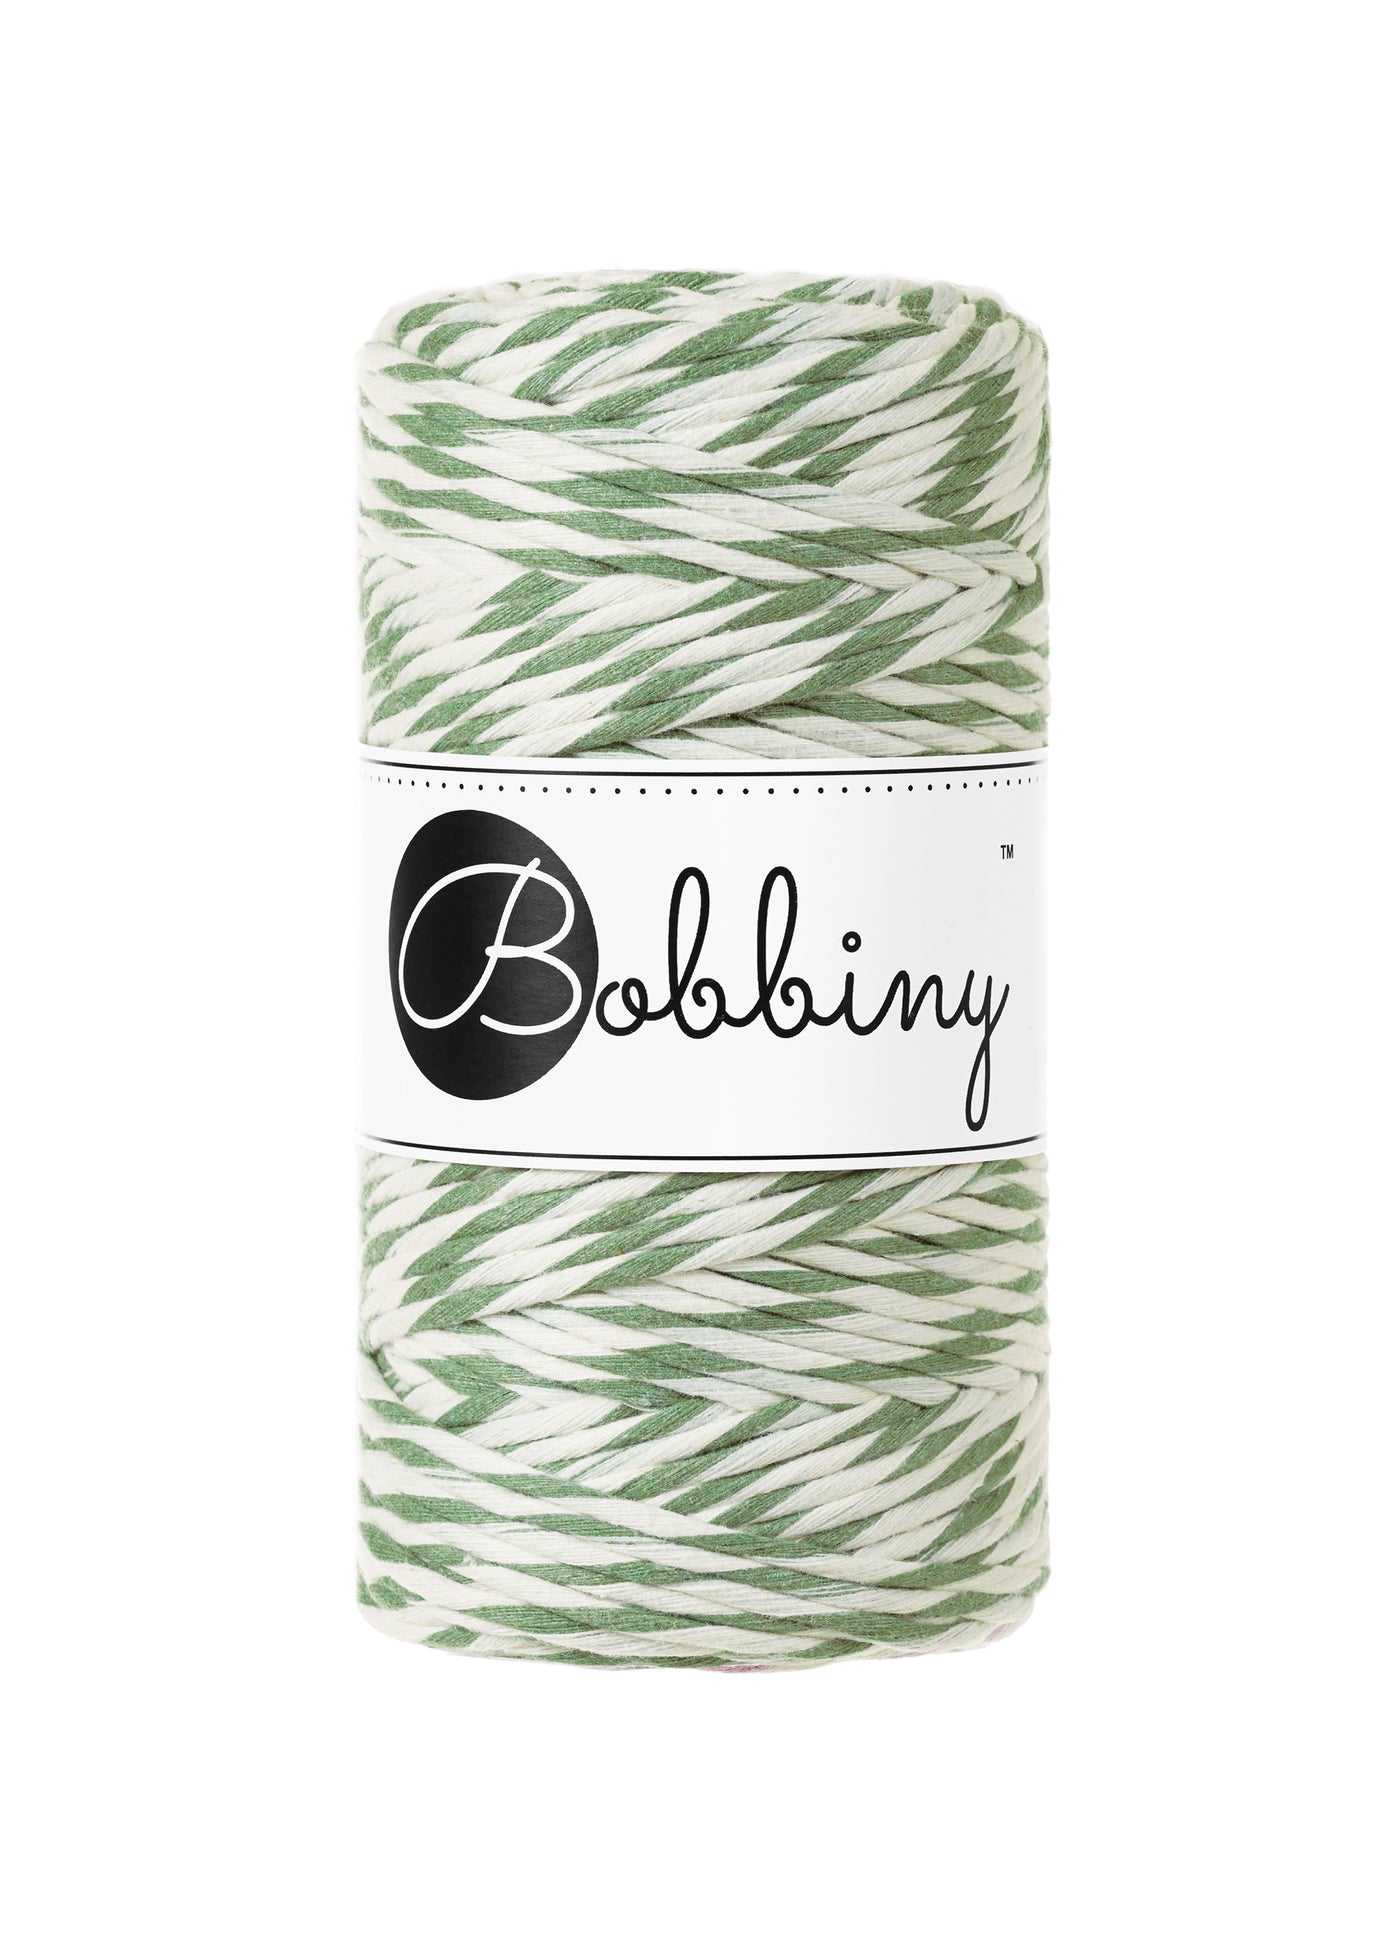 Welcome to the stunning new Bobbiny Magic range! A beautiful blend of your favourite shades designed to give the most stunning effects in your pieces.  This super soft cord is perfect for Macrame or any other fibre art, and makes the most spectacular fringes and tassels. 